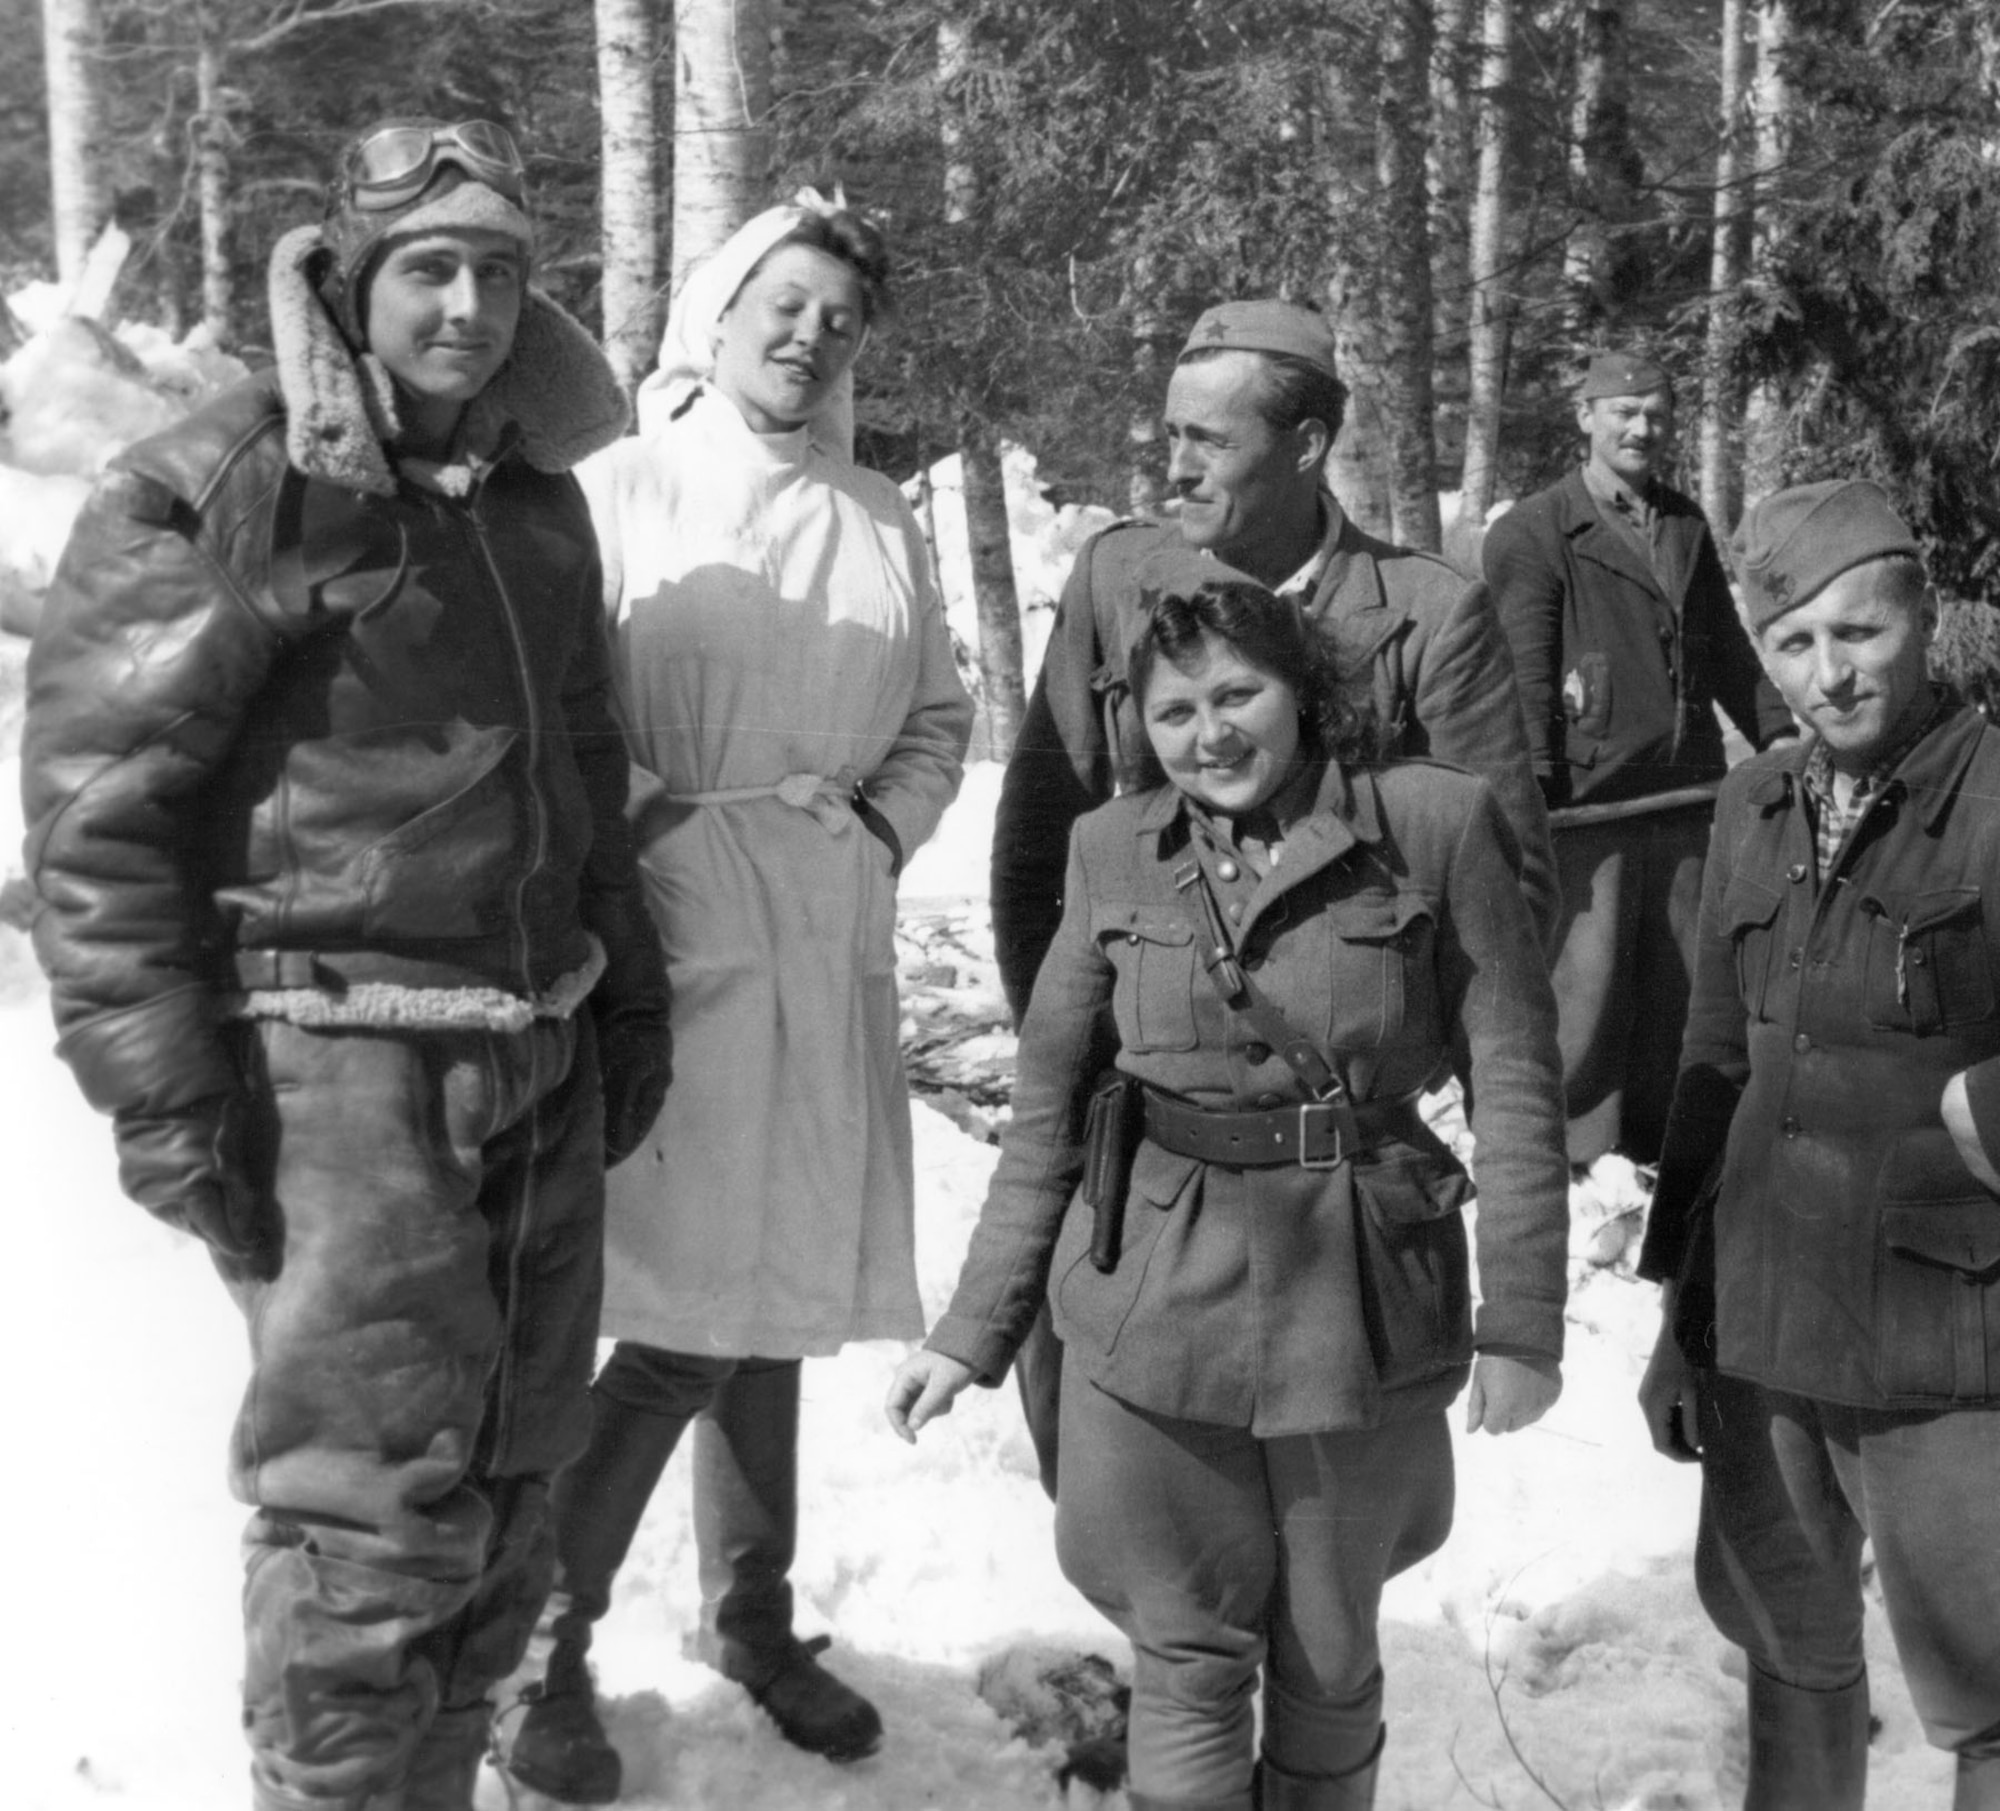 Like their western European counterparts, resistance fighters in the Balkans offered assistance to downed Airmen. Pictured here is one of the crewmen, Robert W. Glasby, at the partisan hospital in Zgornji Hrastnik. (U.S. Air Force)